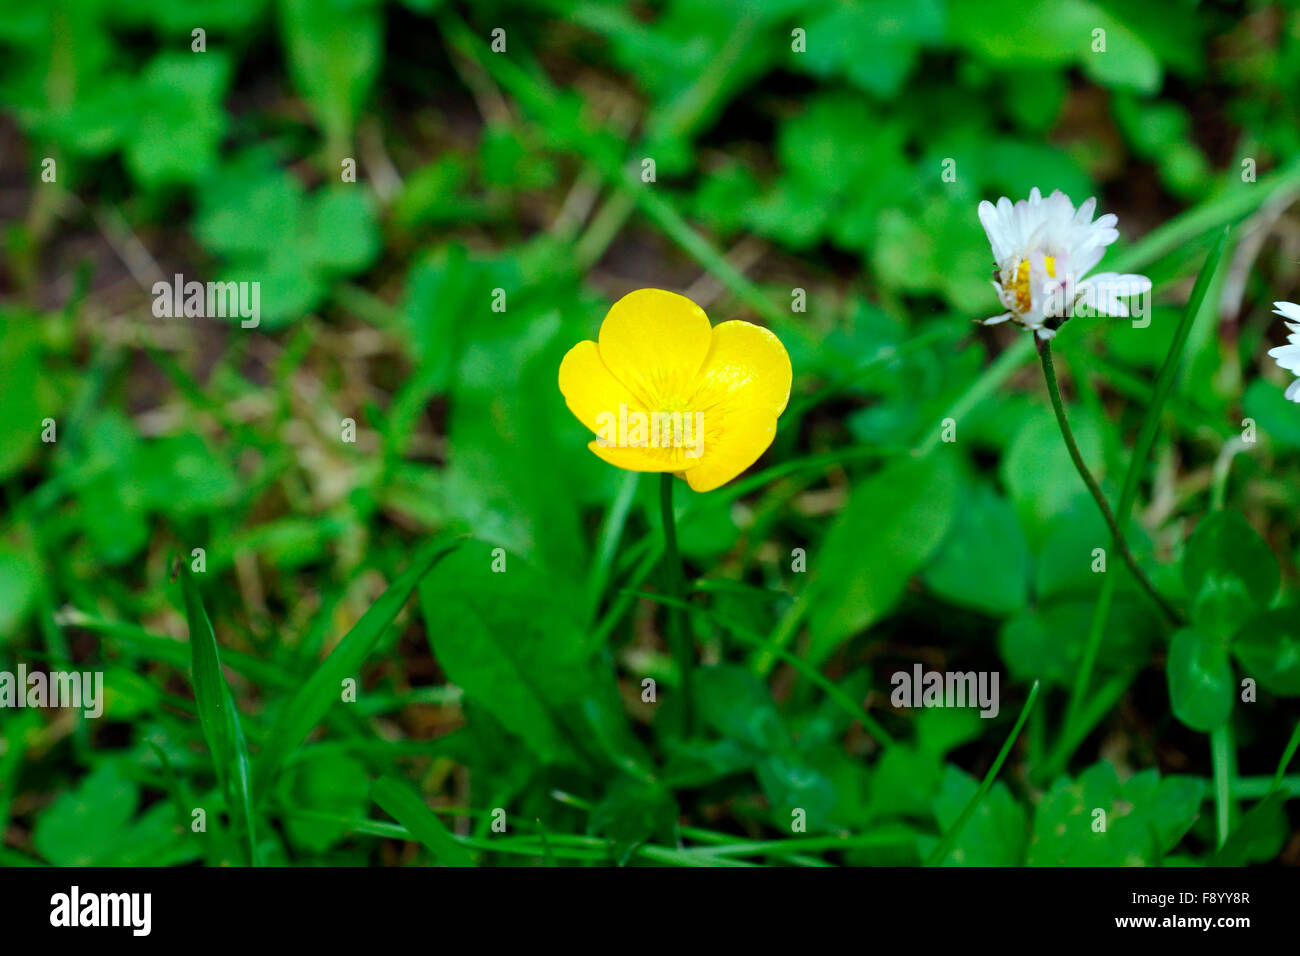 BUTTERCUP NEXT TO A DAISY Stock Photo